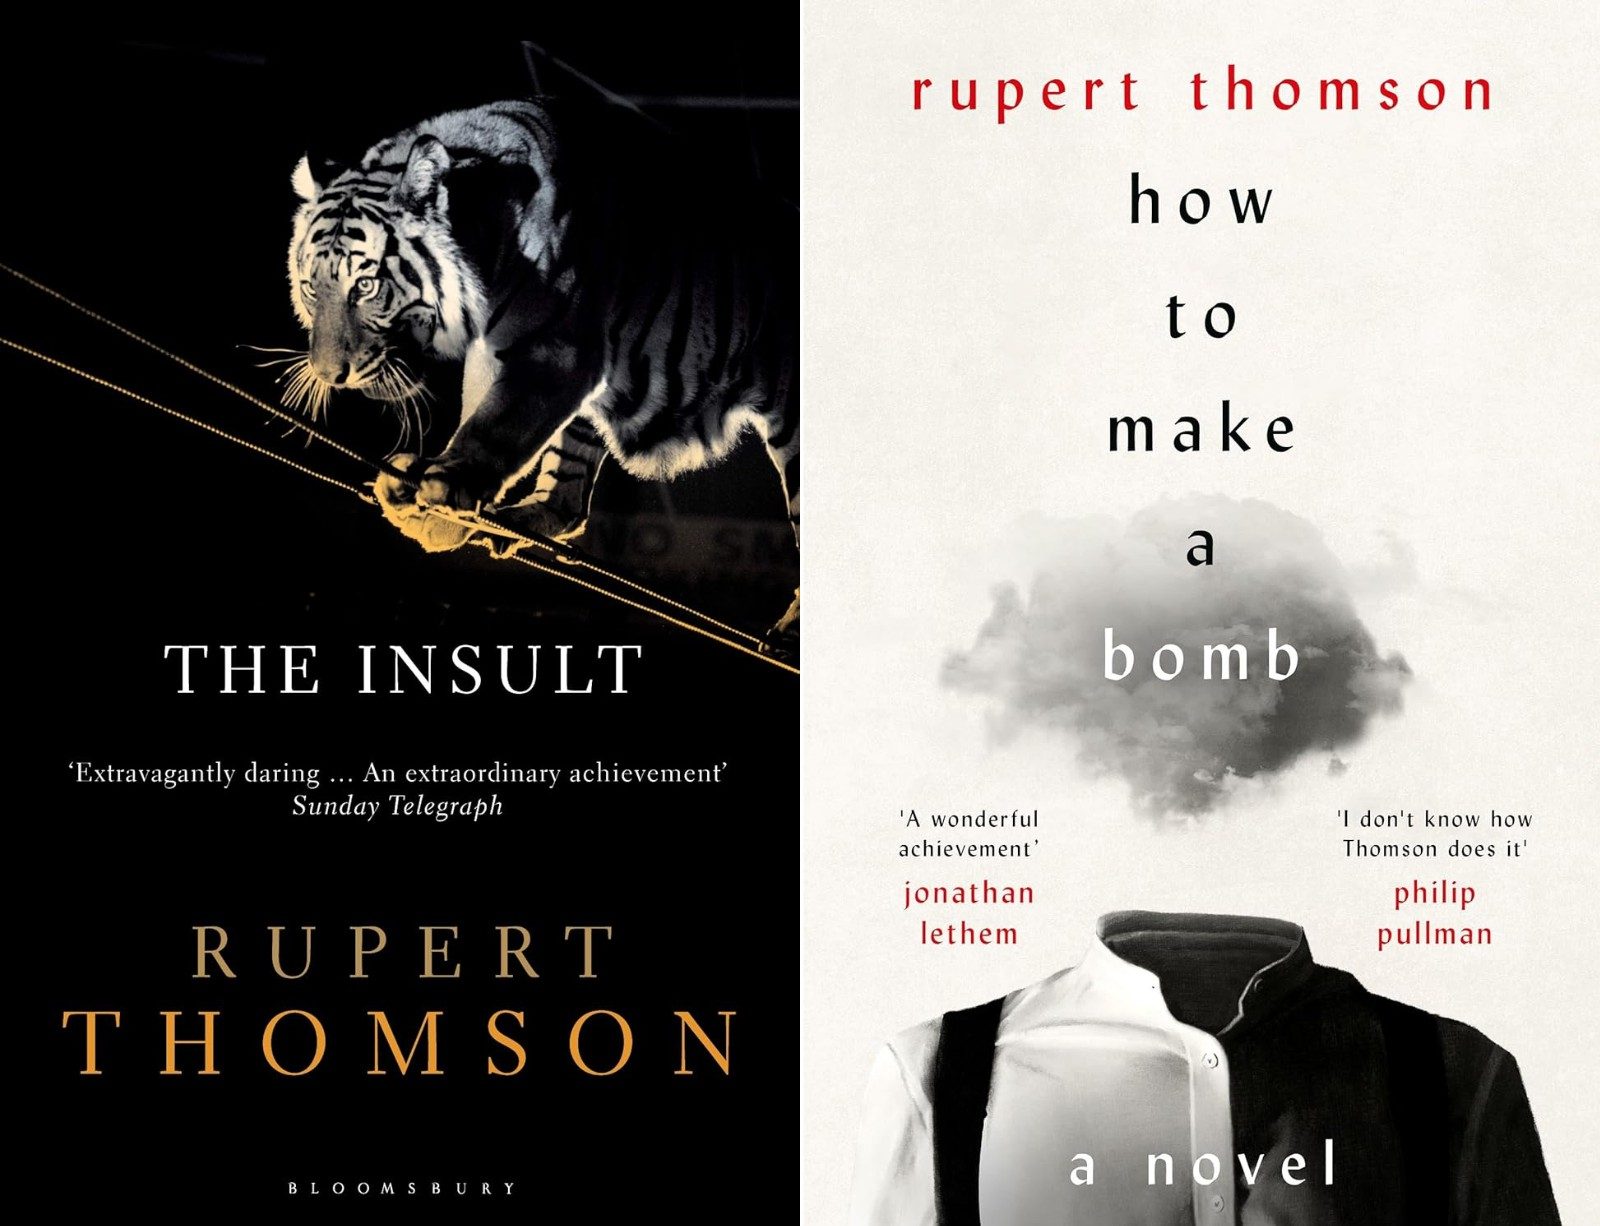 author rupert thomson: ‘we smashed the furniture in my dead dad’s house – and got a writ for noise pollution’